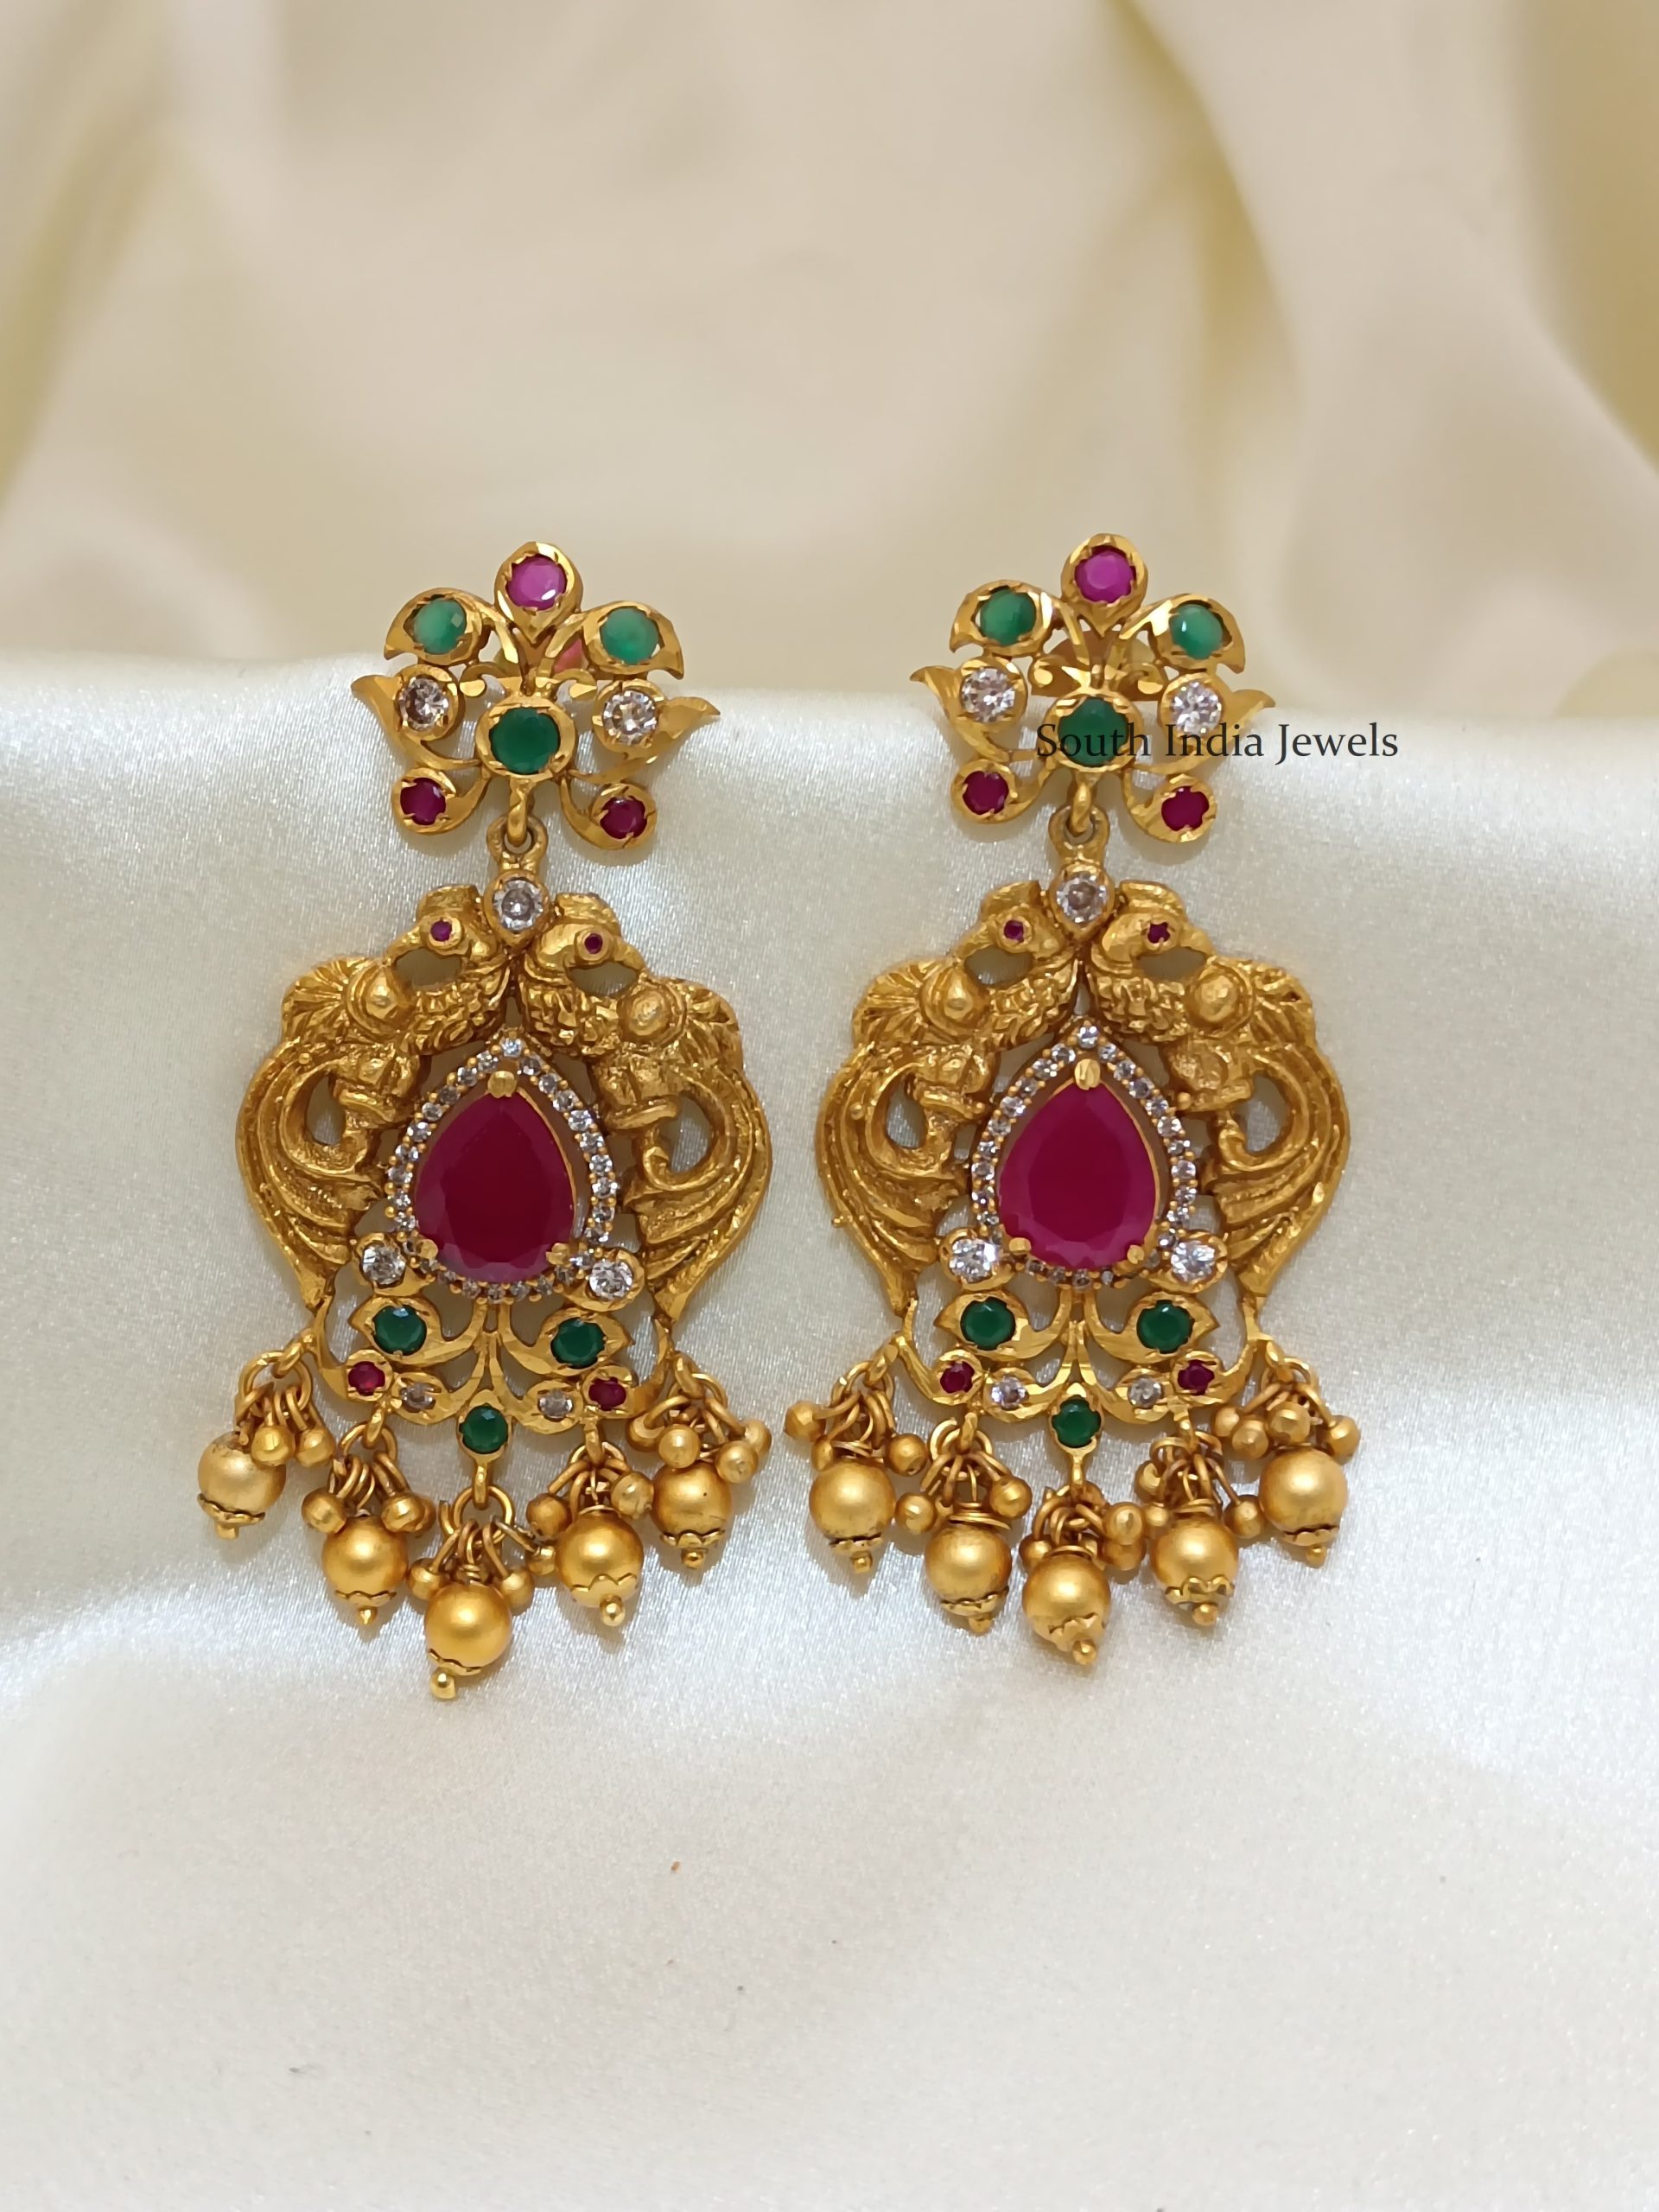 Matte Finish Multi Color Earrings- South India Jewels- Online shop